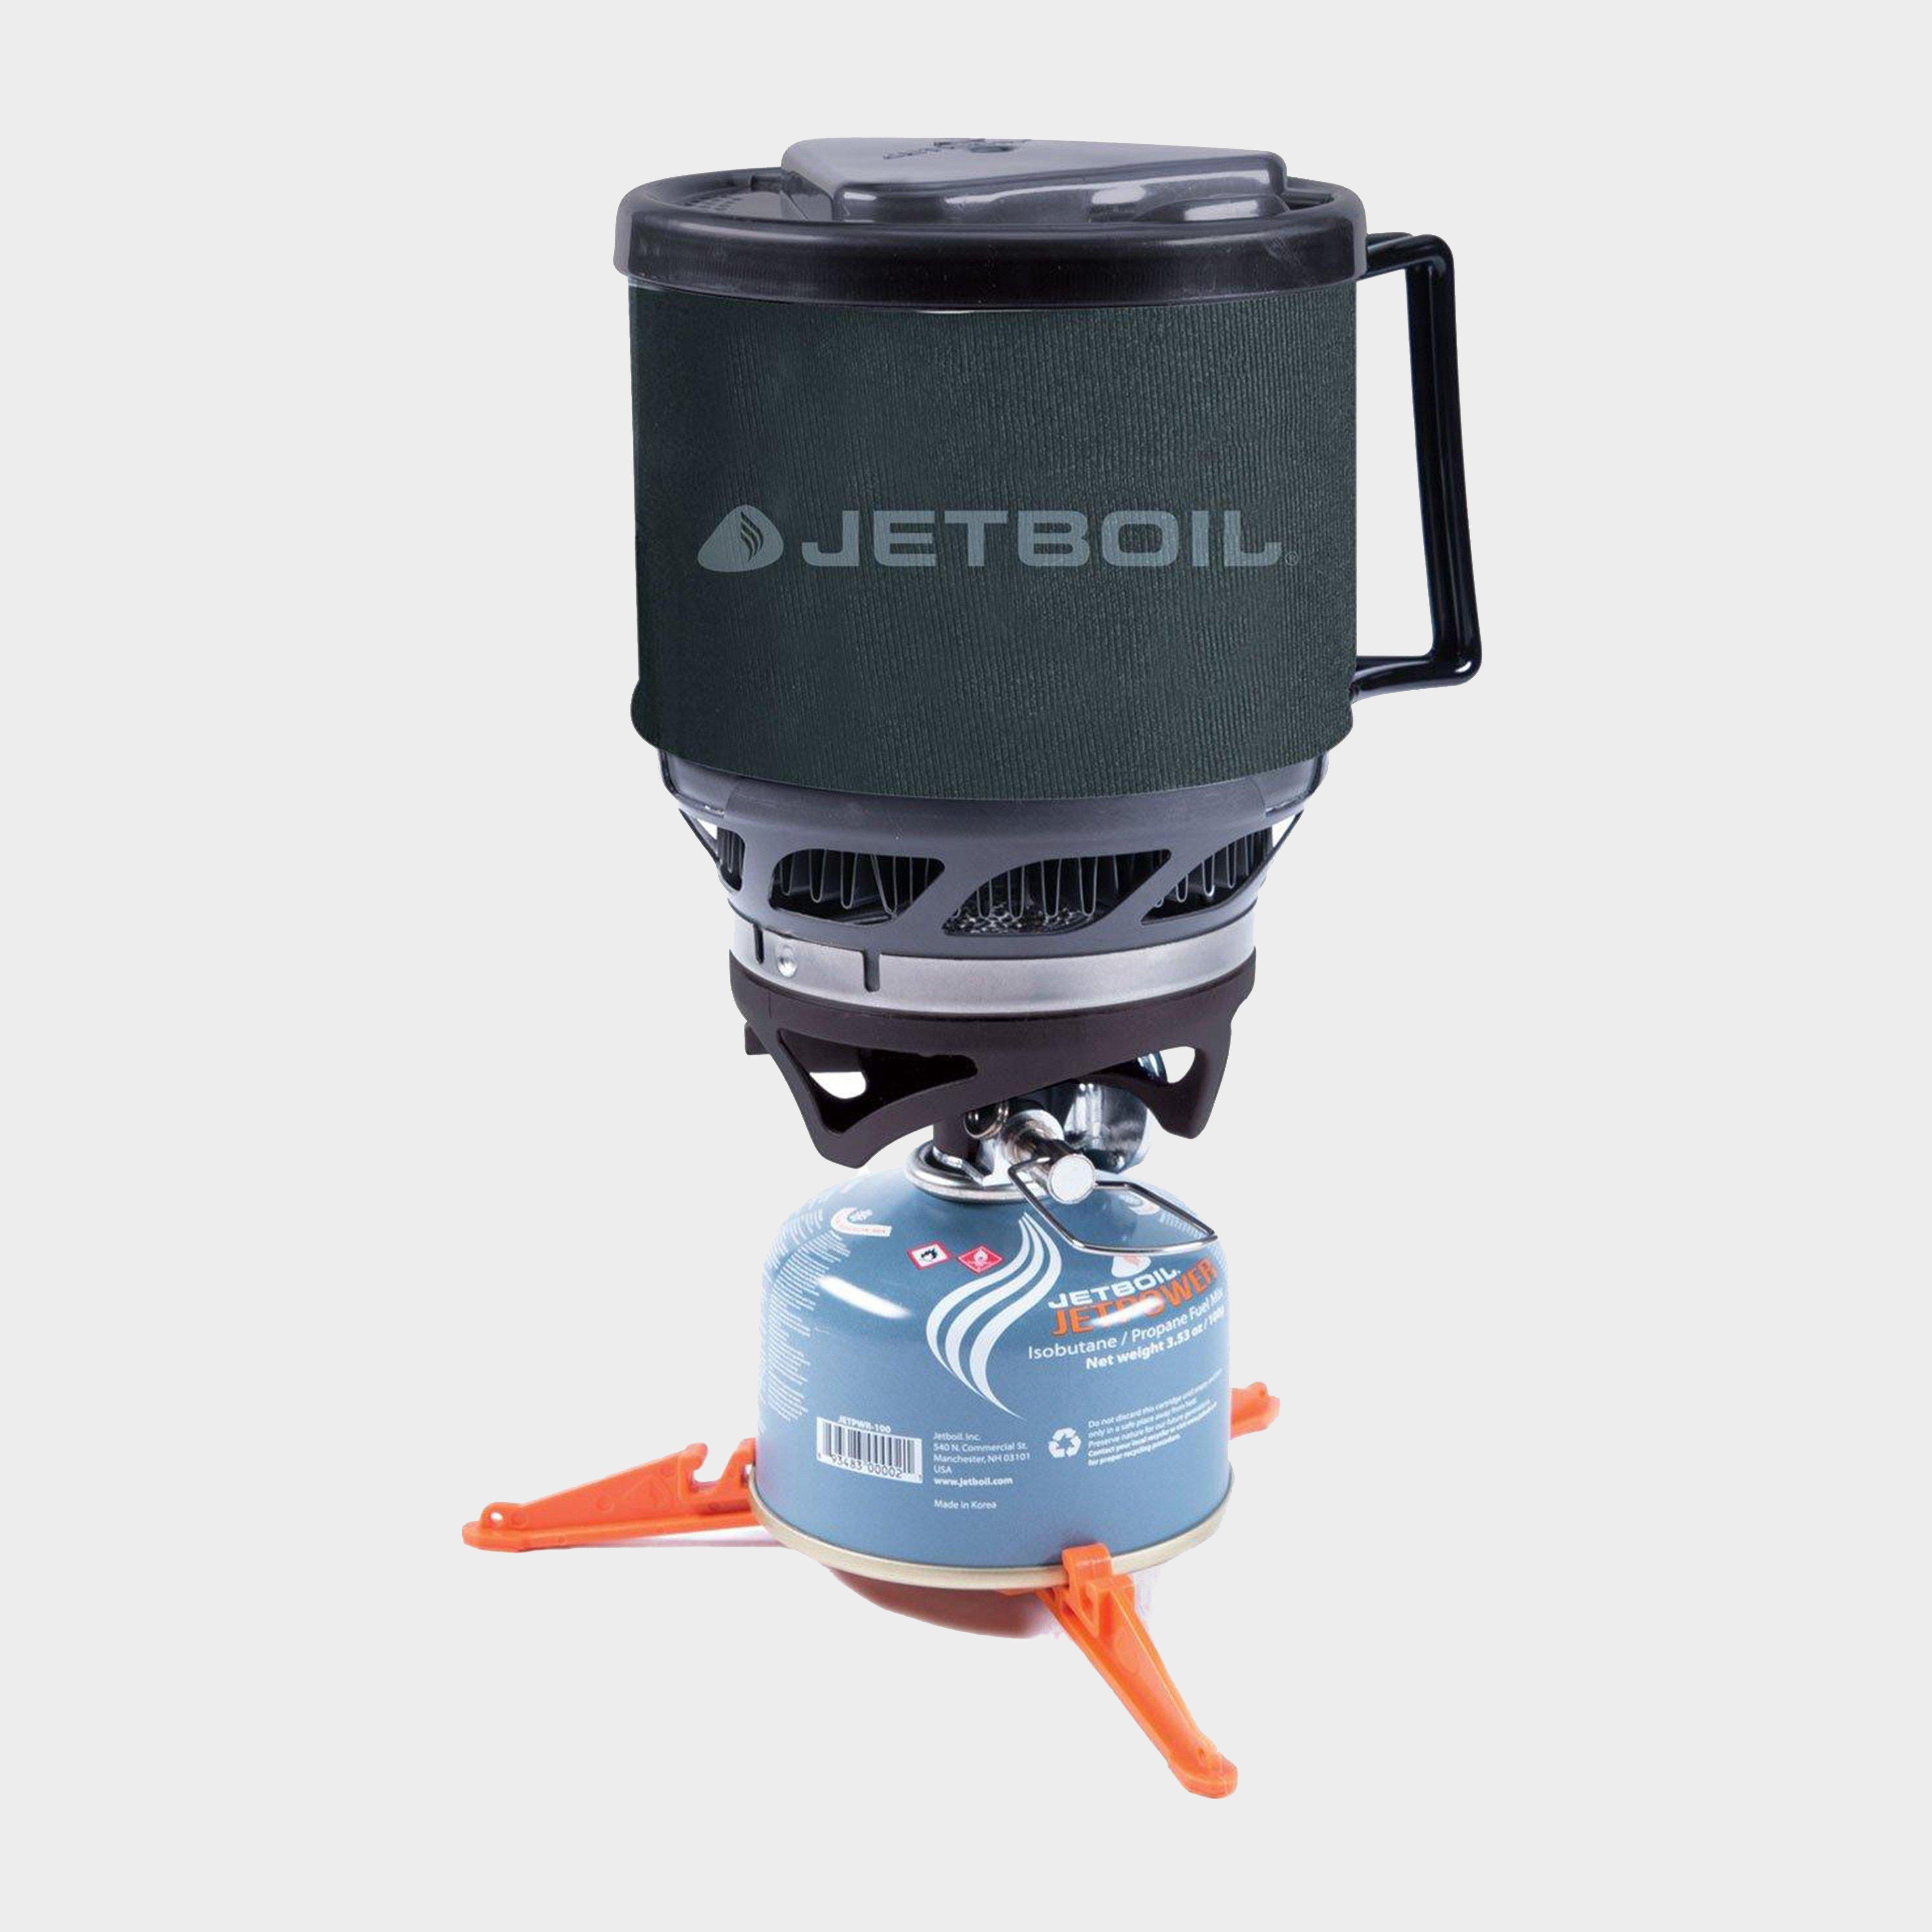 Image of Jetboil Minimo Cooking System - Carbon, Carbon